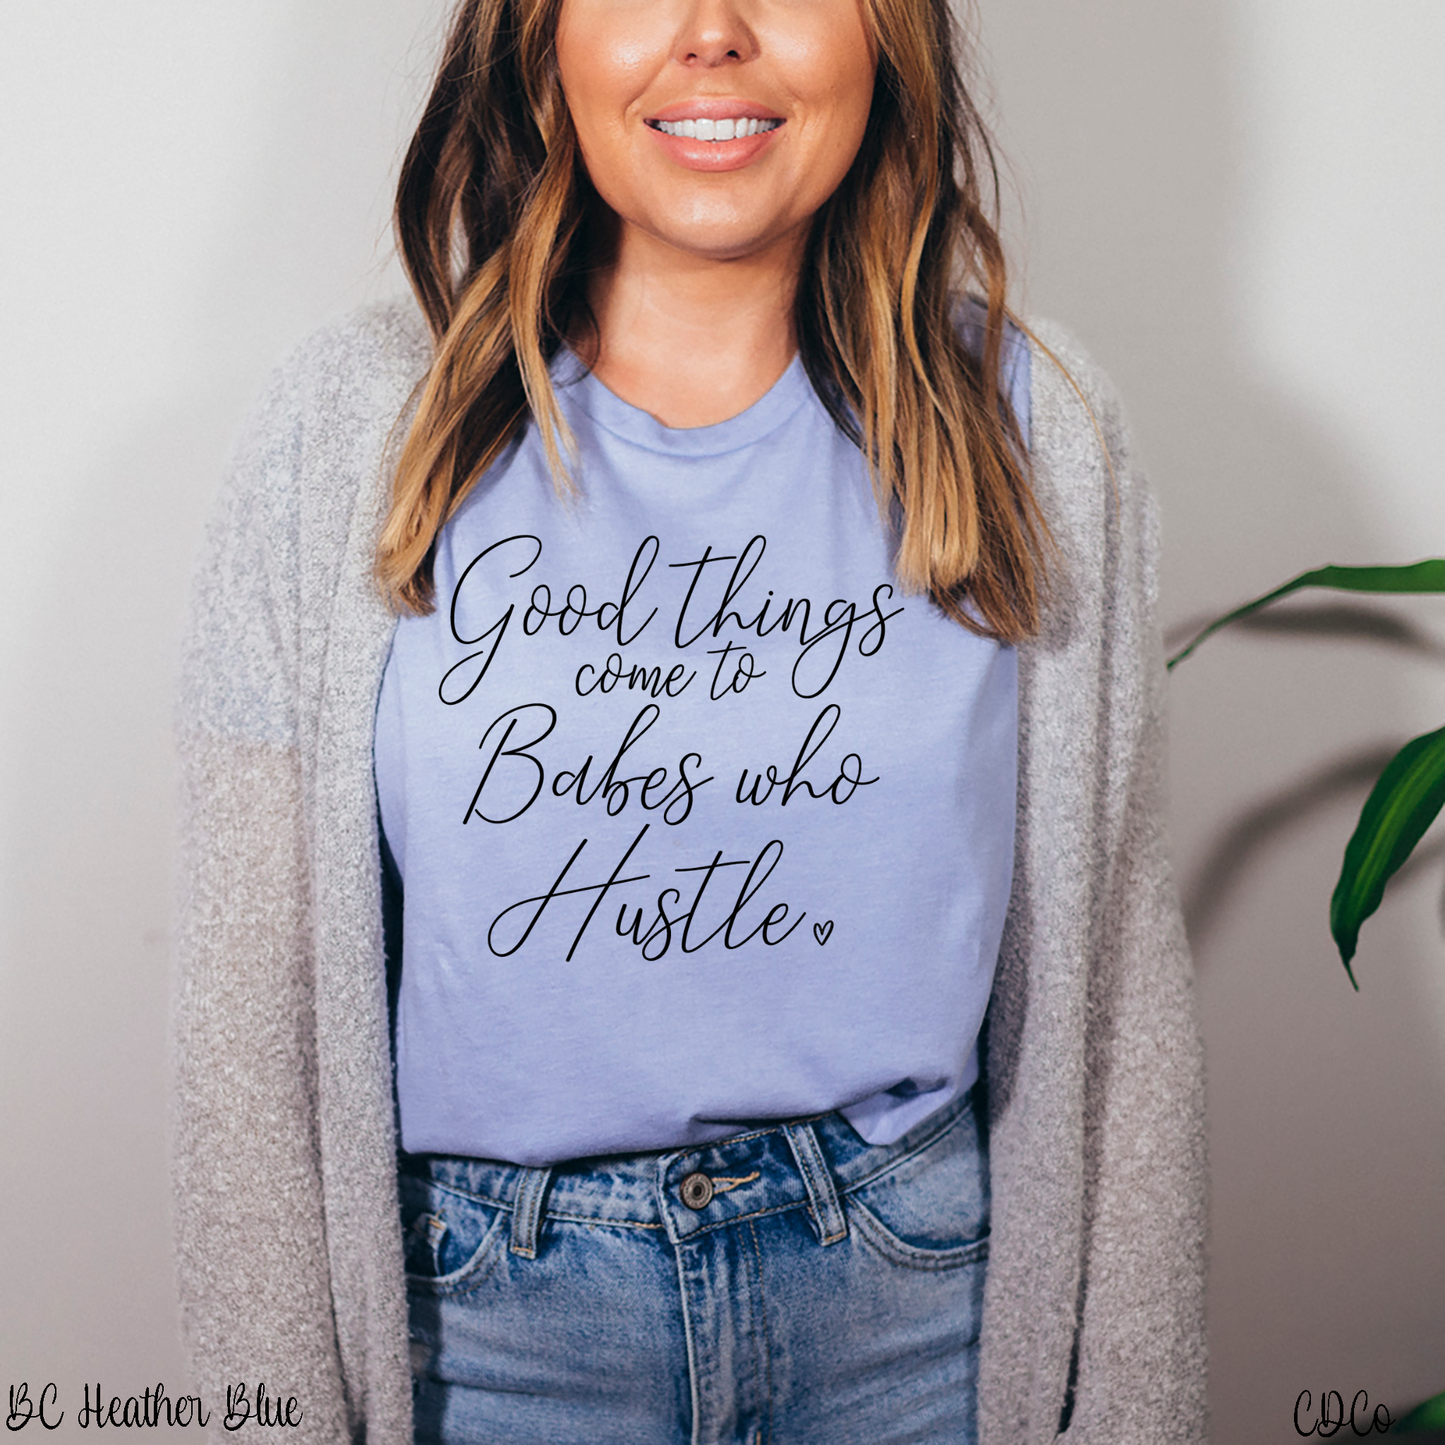 Good Things Come to Babes Who Hustle (325°)